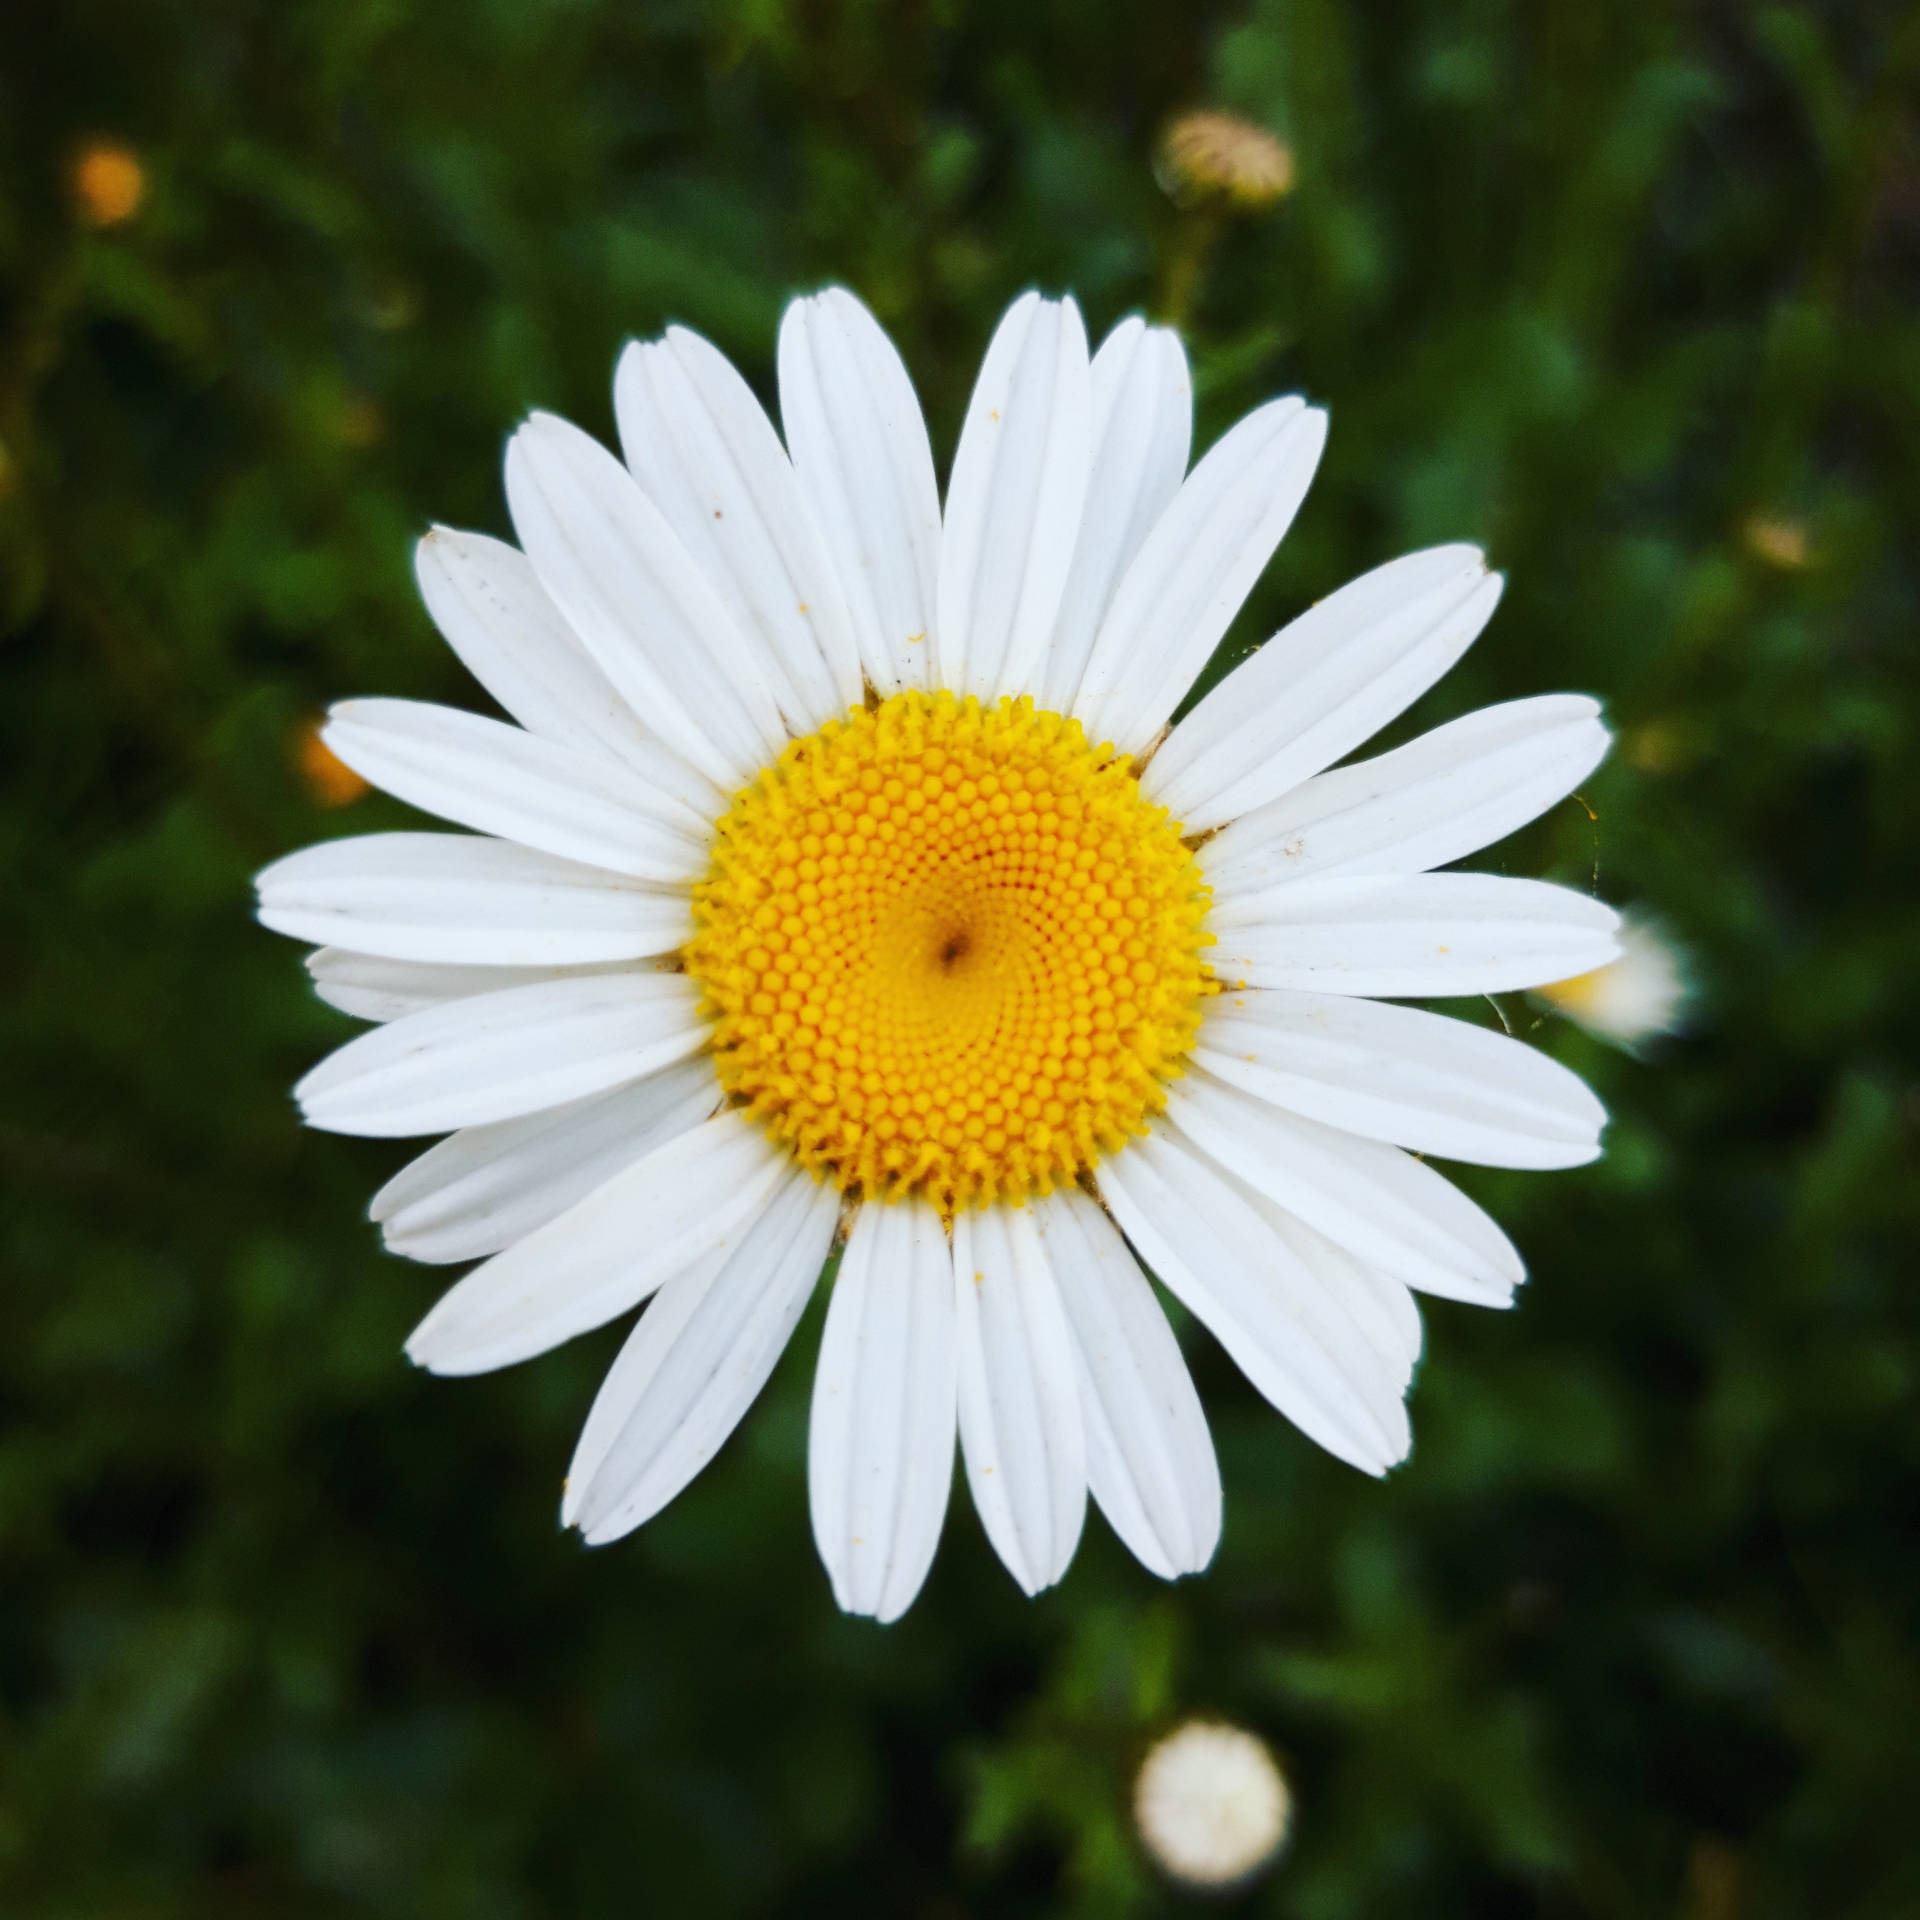 Daisy 3456X3456 Wallpaper and Background Image